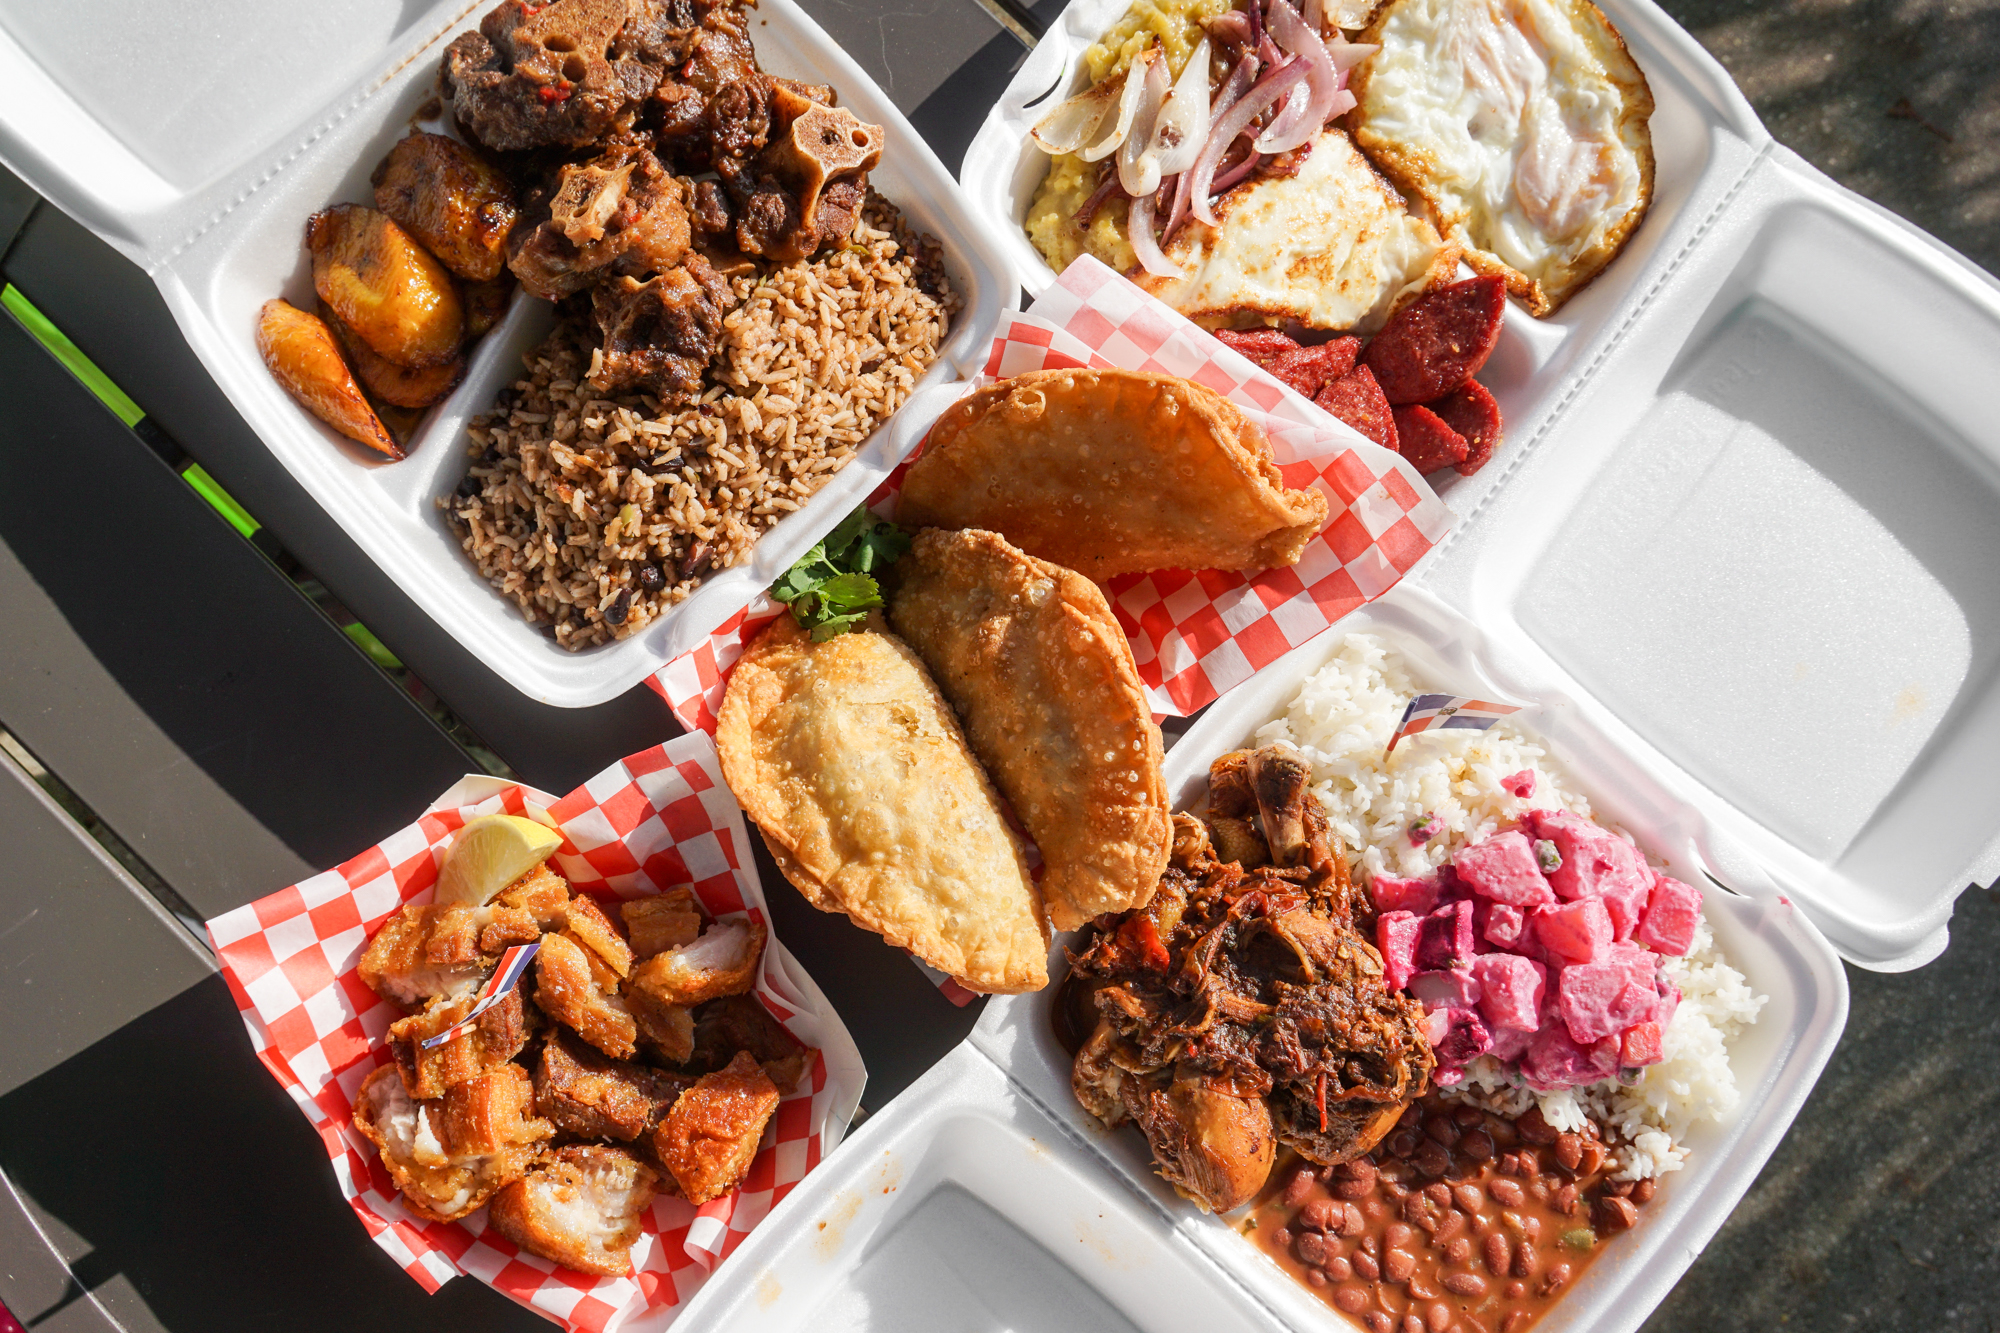 An overhead shot of takeout containers filled with Domincan food